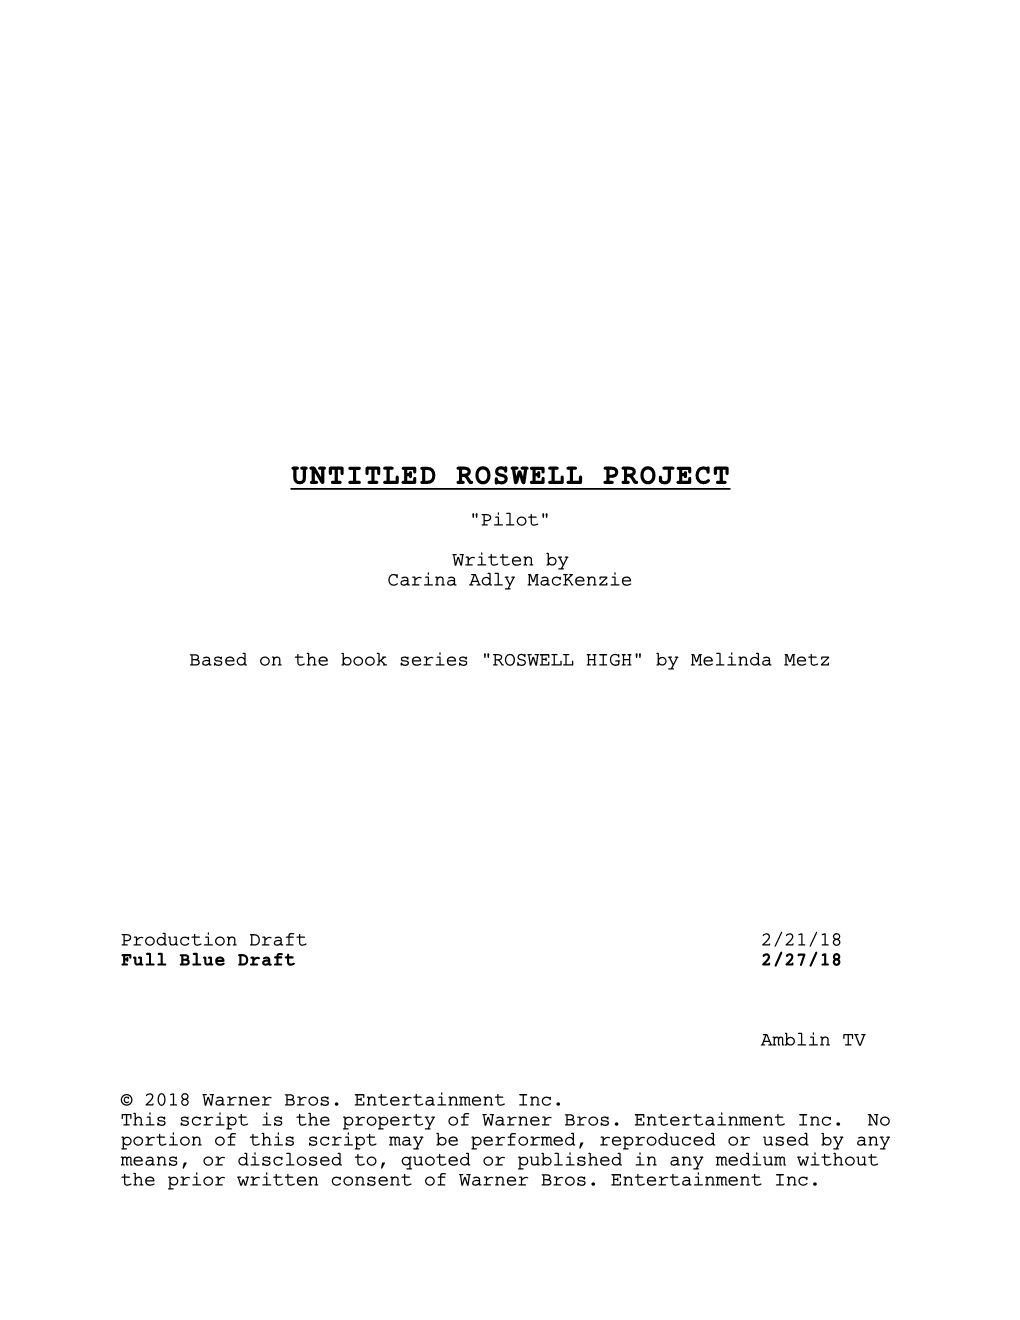 UNTITLED ROSWELL PROJECT "Pilot" Written by Carina Adly Mackenzie